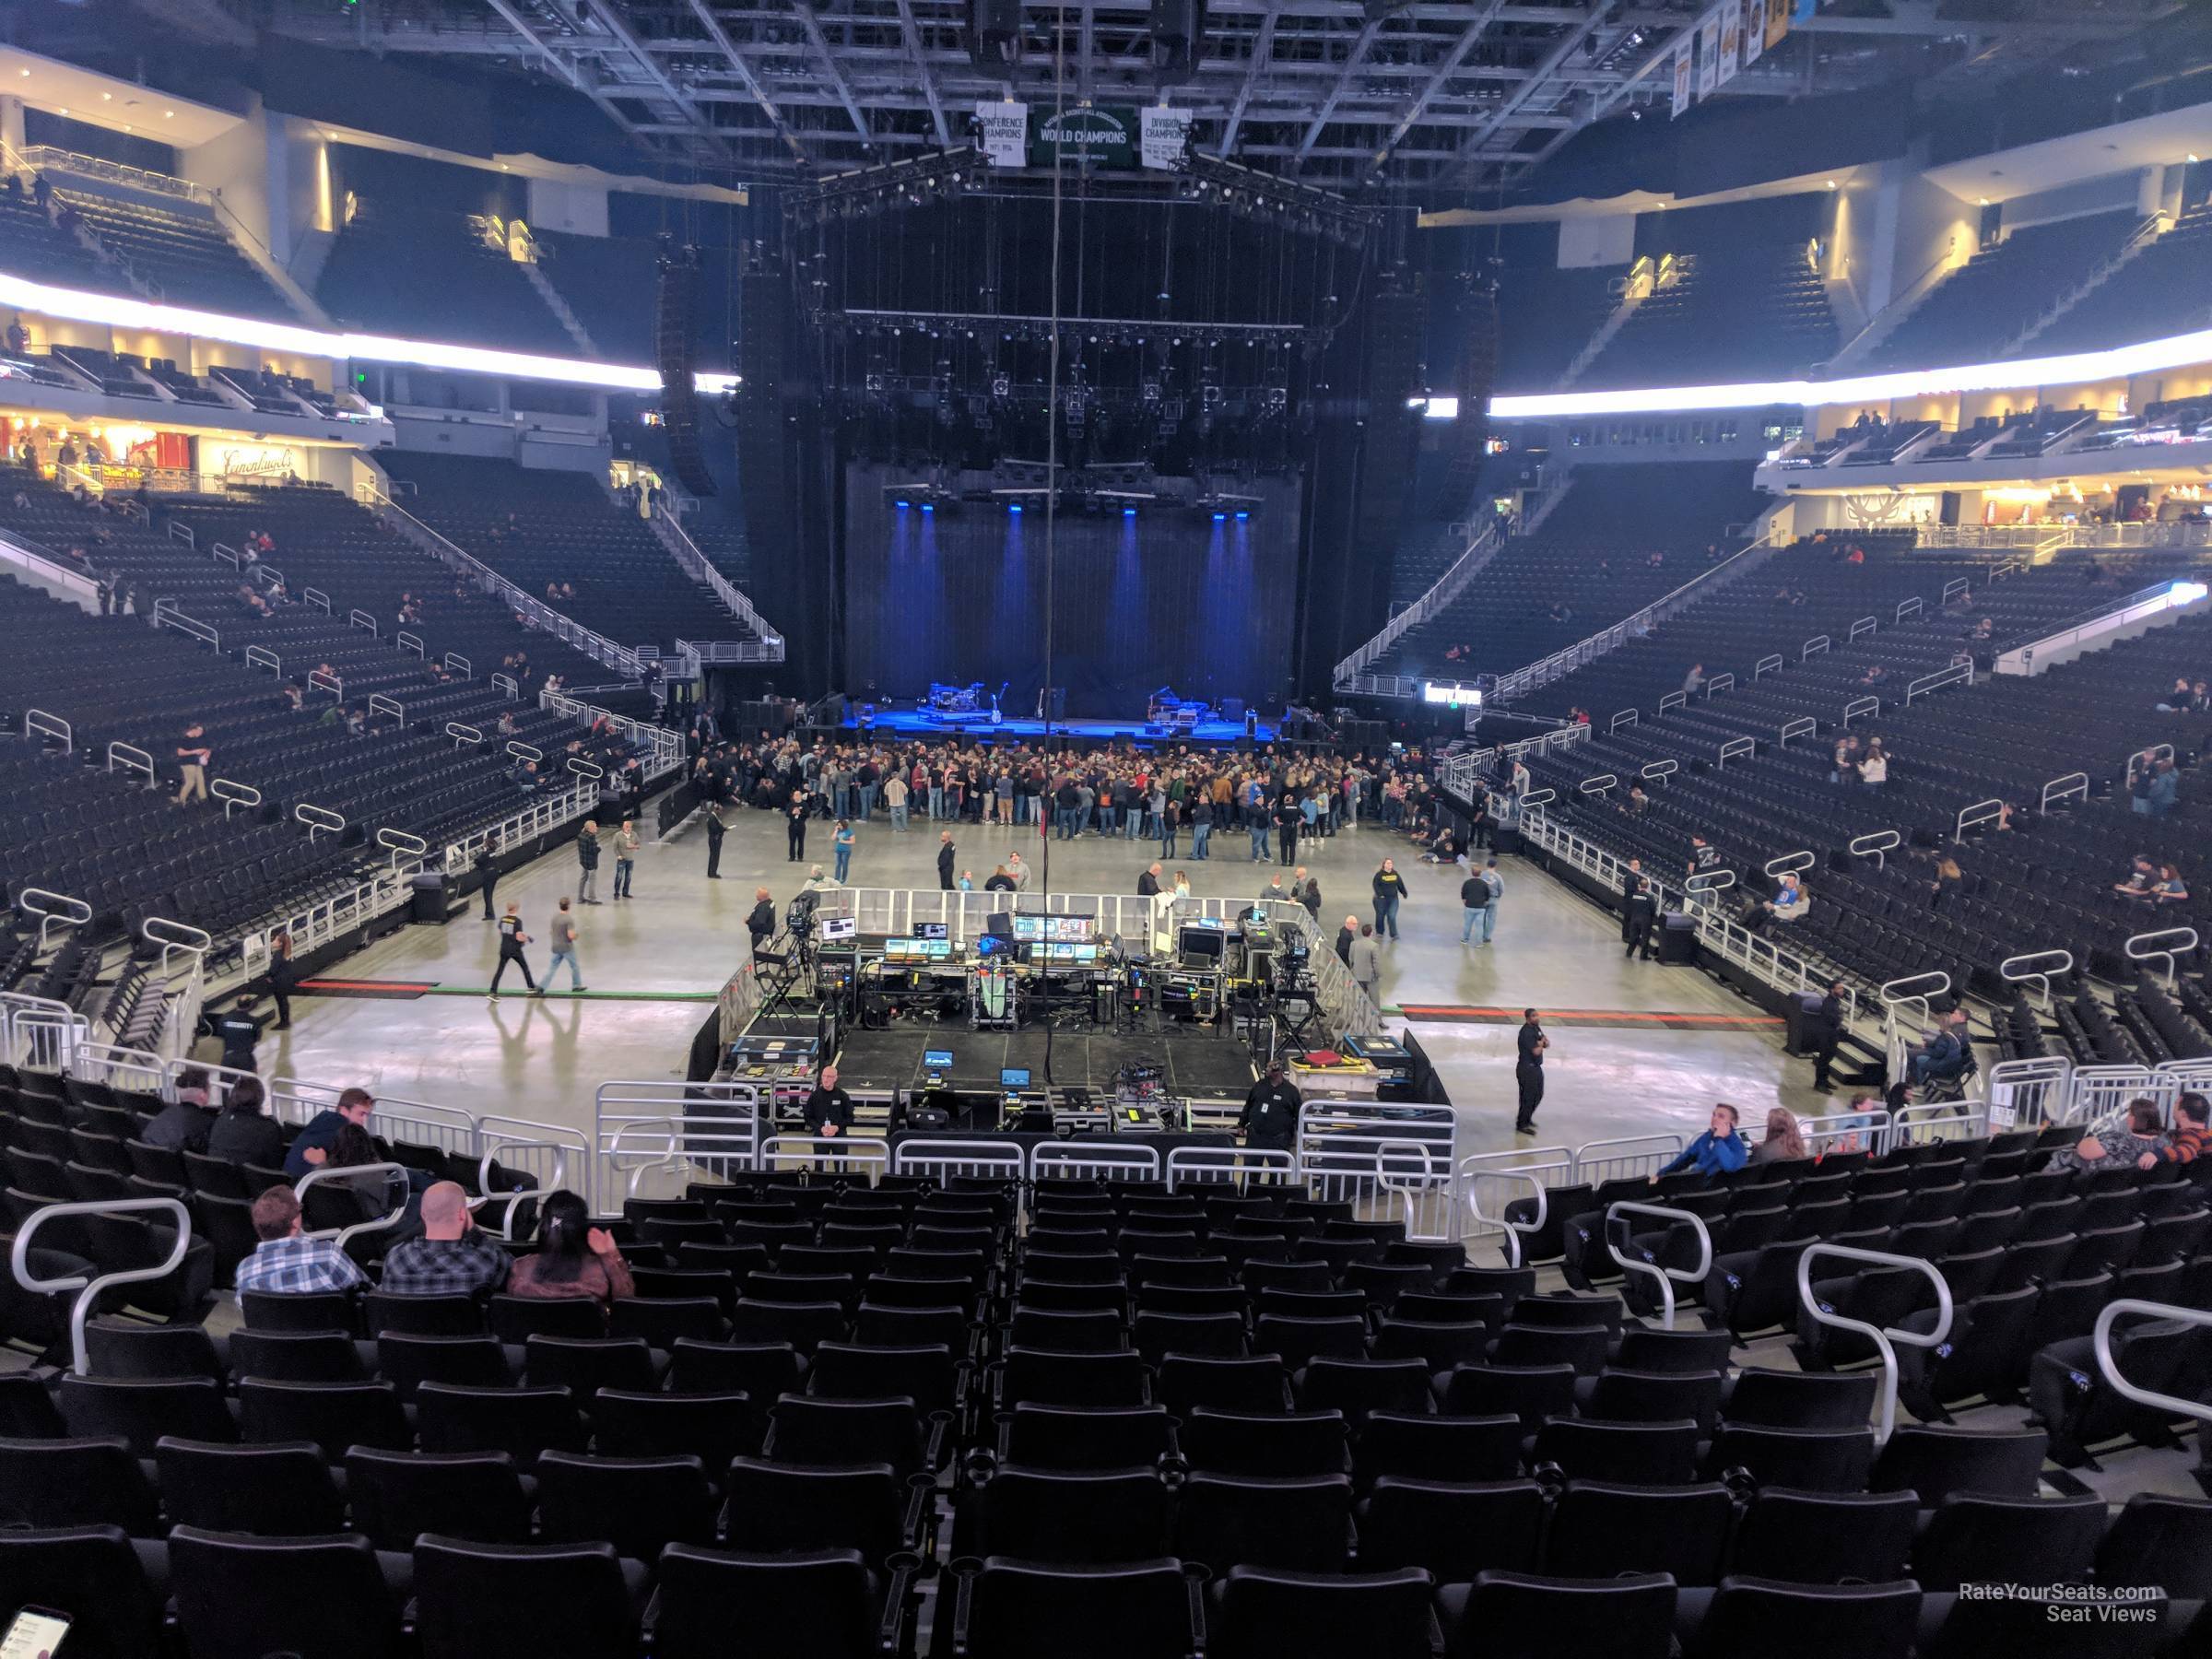 section 101, row 20 seat view  for concert - fiserv forum